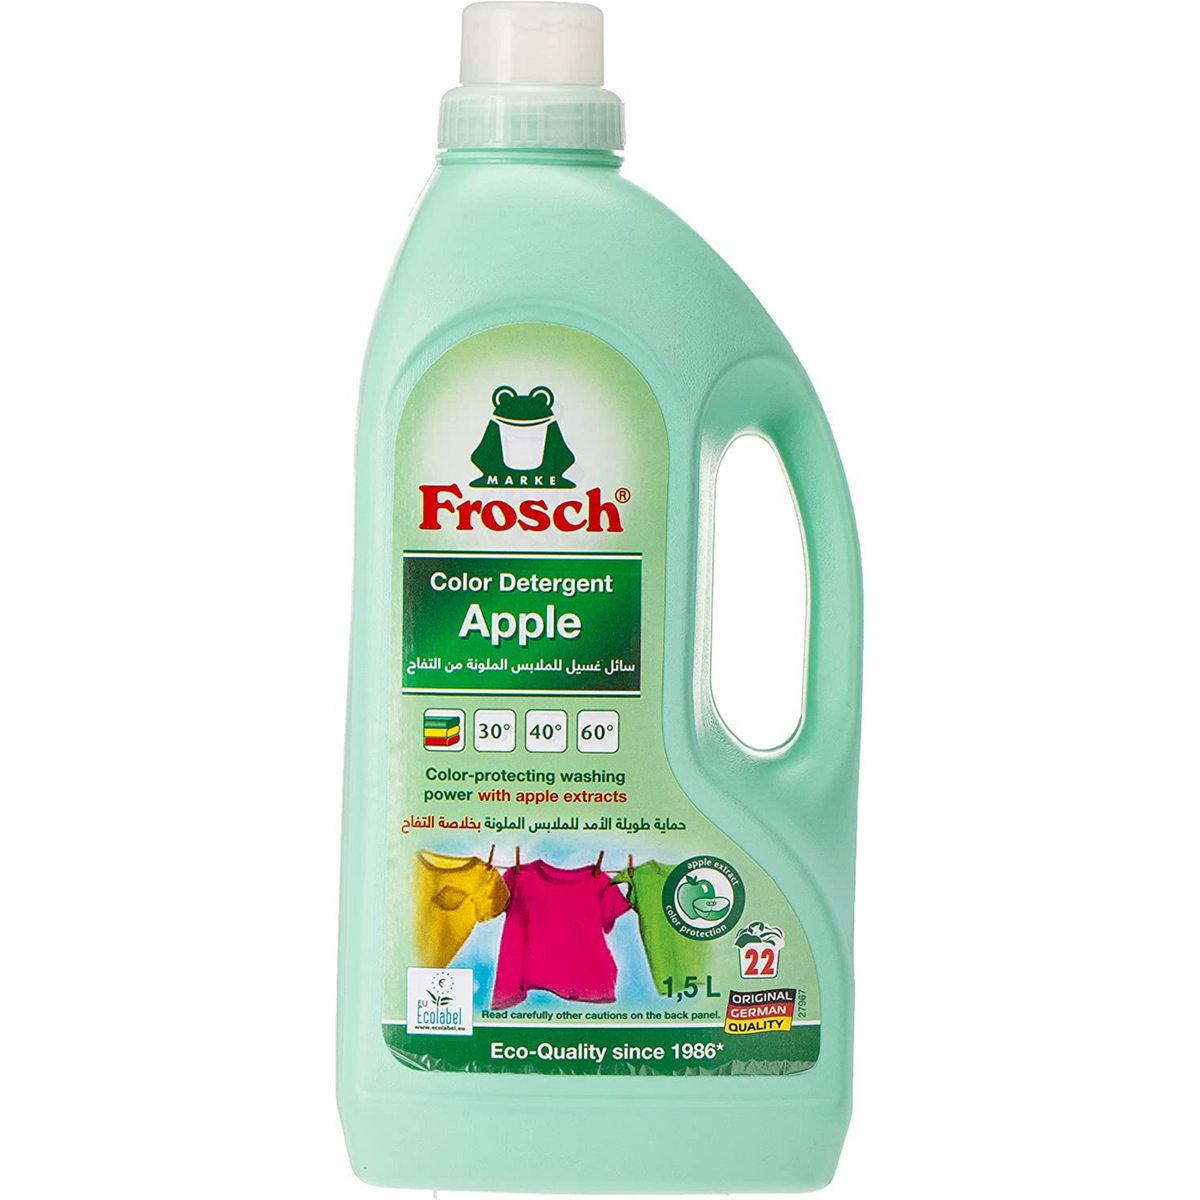 Primary Image of Frosch Apple Scented Color Laundry Detergent (1.5 L)